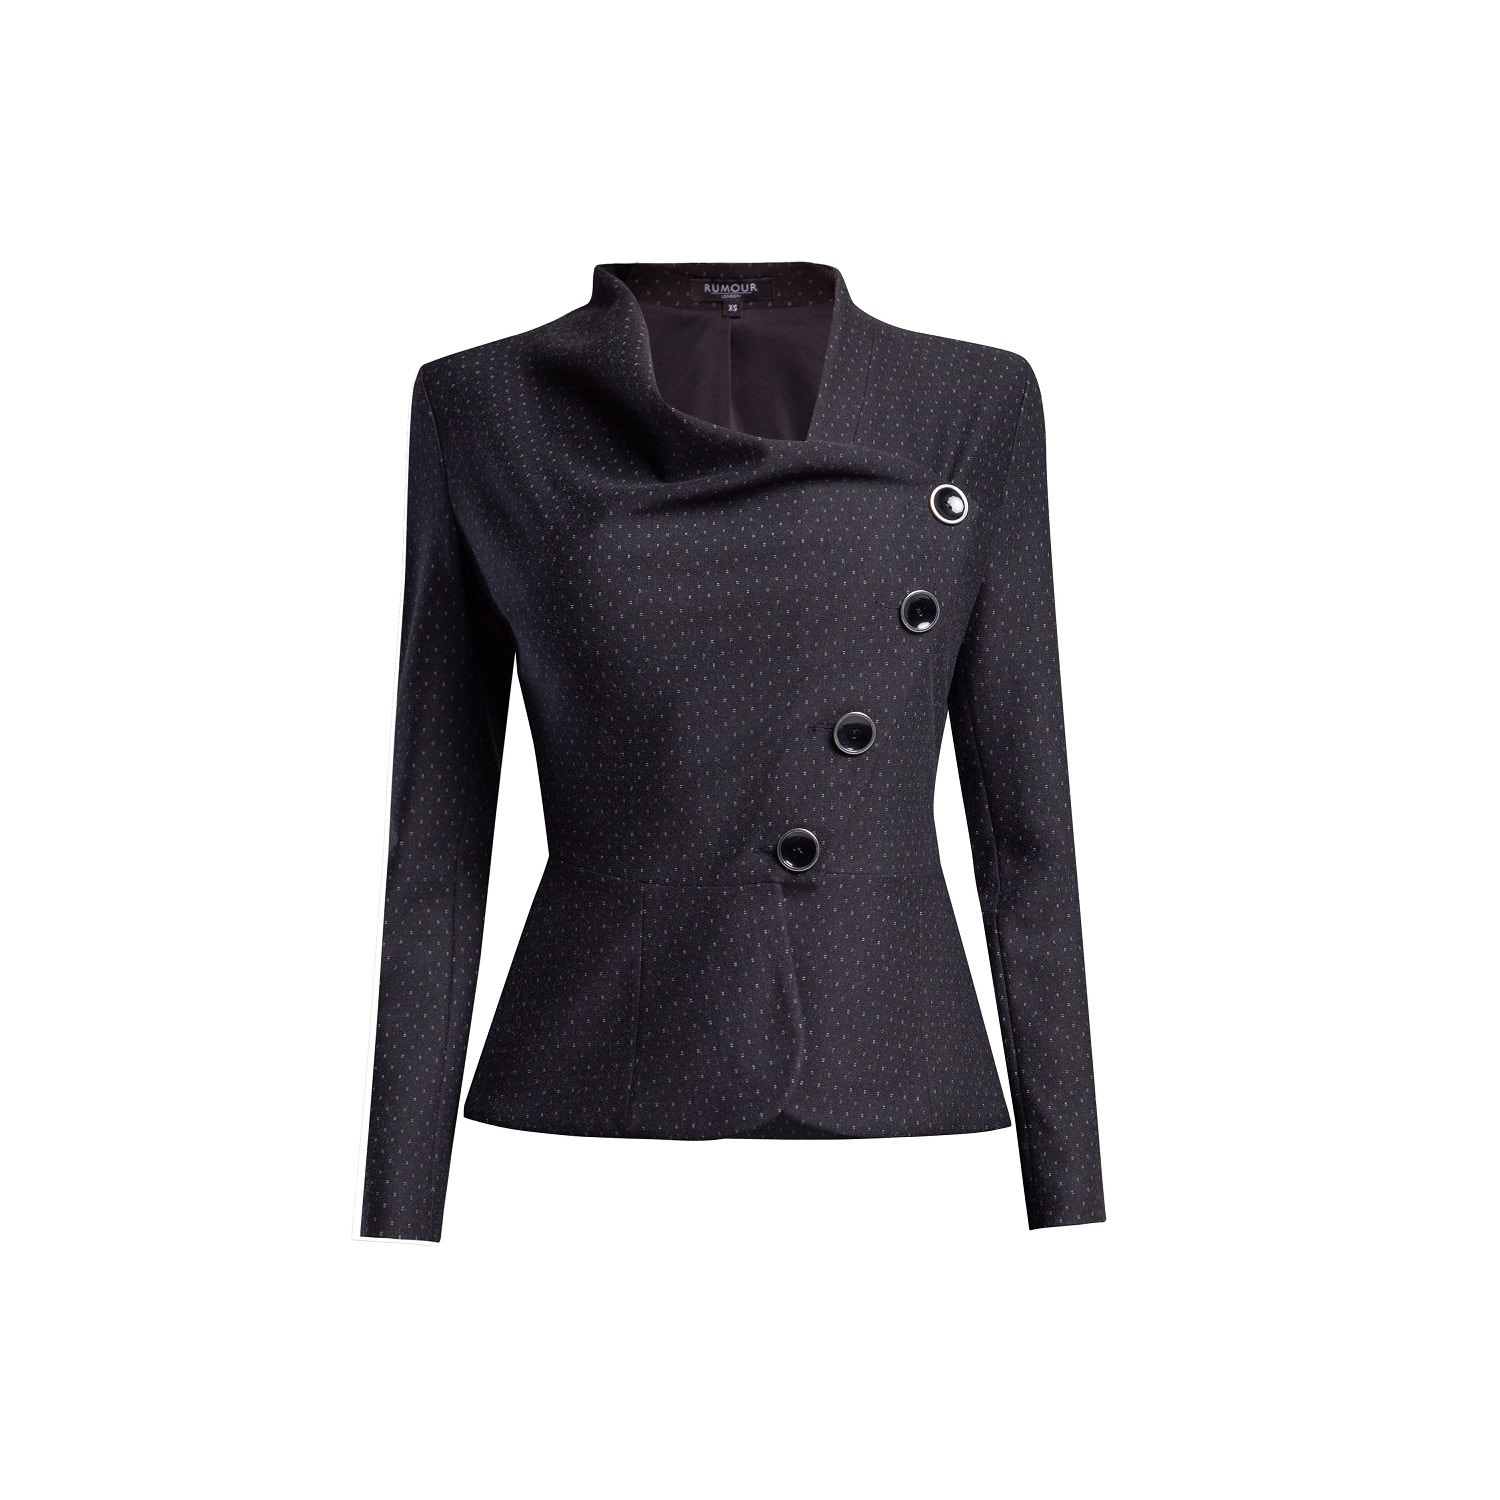 Women’s Black Richmond Jacquard Jersey Tailored Jacket With Asymmetric Buttoning Extra Small Rumour London